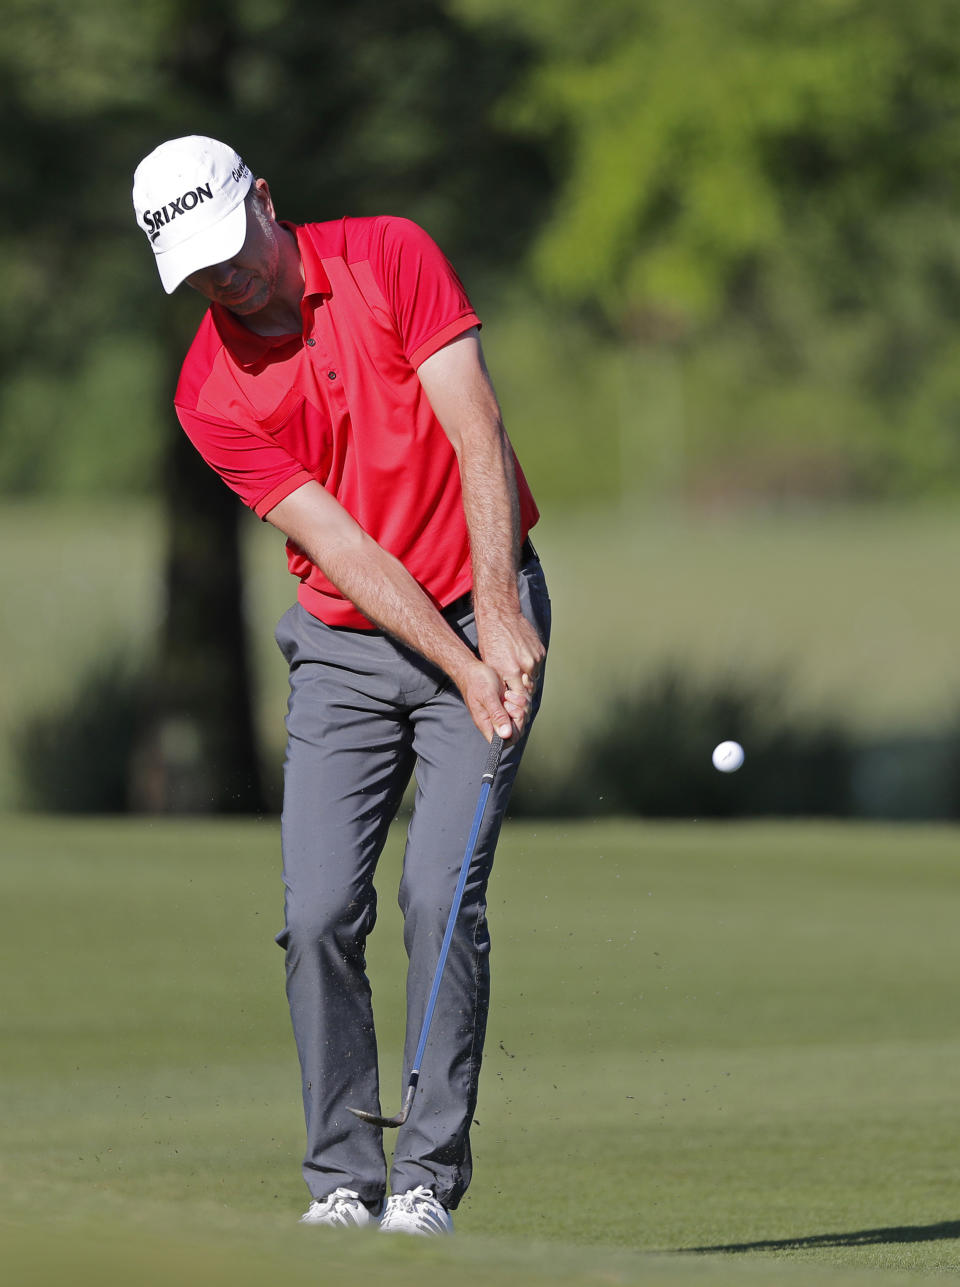 Martin Laird chips onto the first fairway during the first round of the PGA Zurich Classic golf tournament at TPC Louisiana in Avondale, La., Thursday, April 25, 2019. (AP Photo/Gerald Herbert)